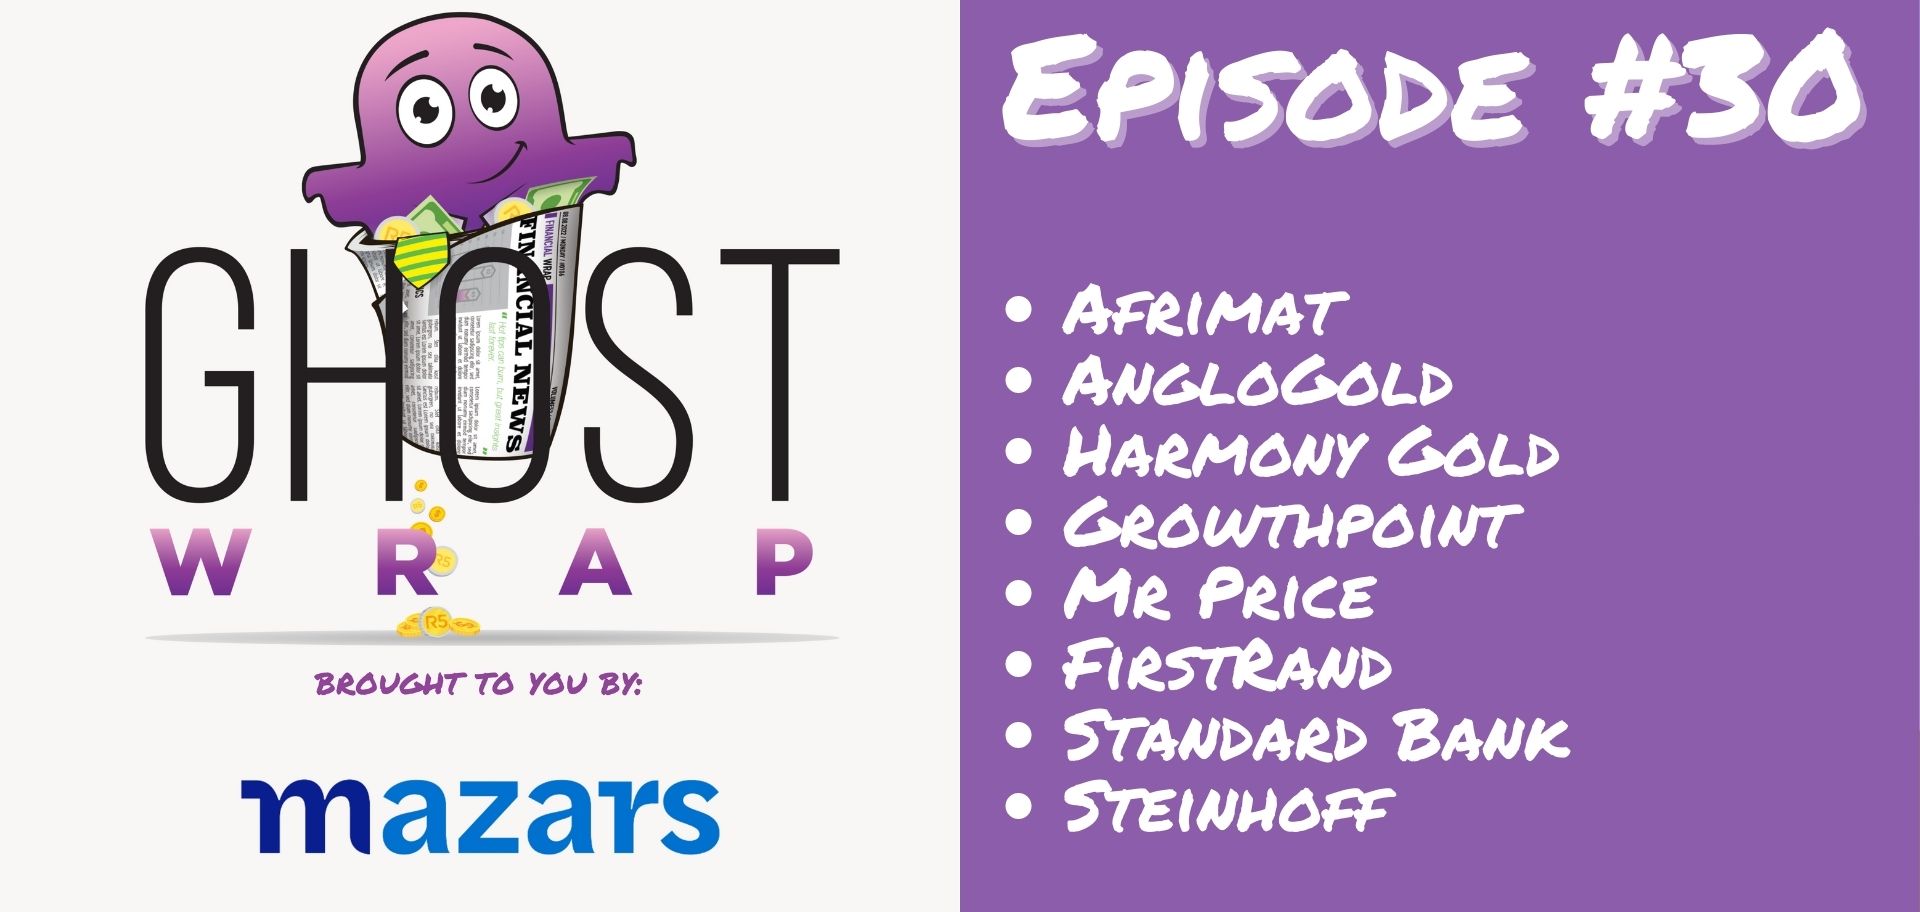 Ghost Wrap #30 (Afrimat | AngloGold | Harmony Gold | Growthpoint | Mr Price | FirstRand | Standard Bank | Steinhoff)